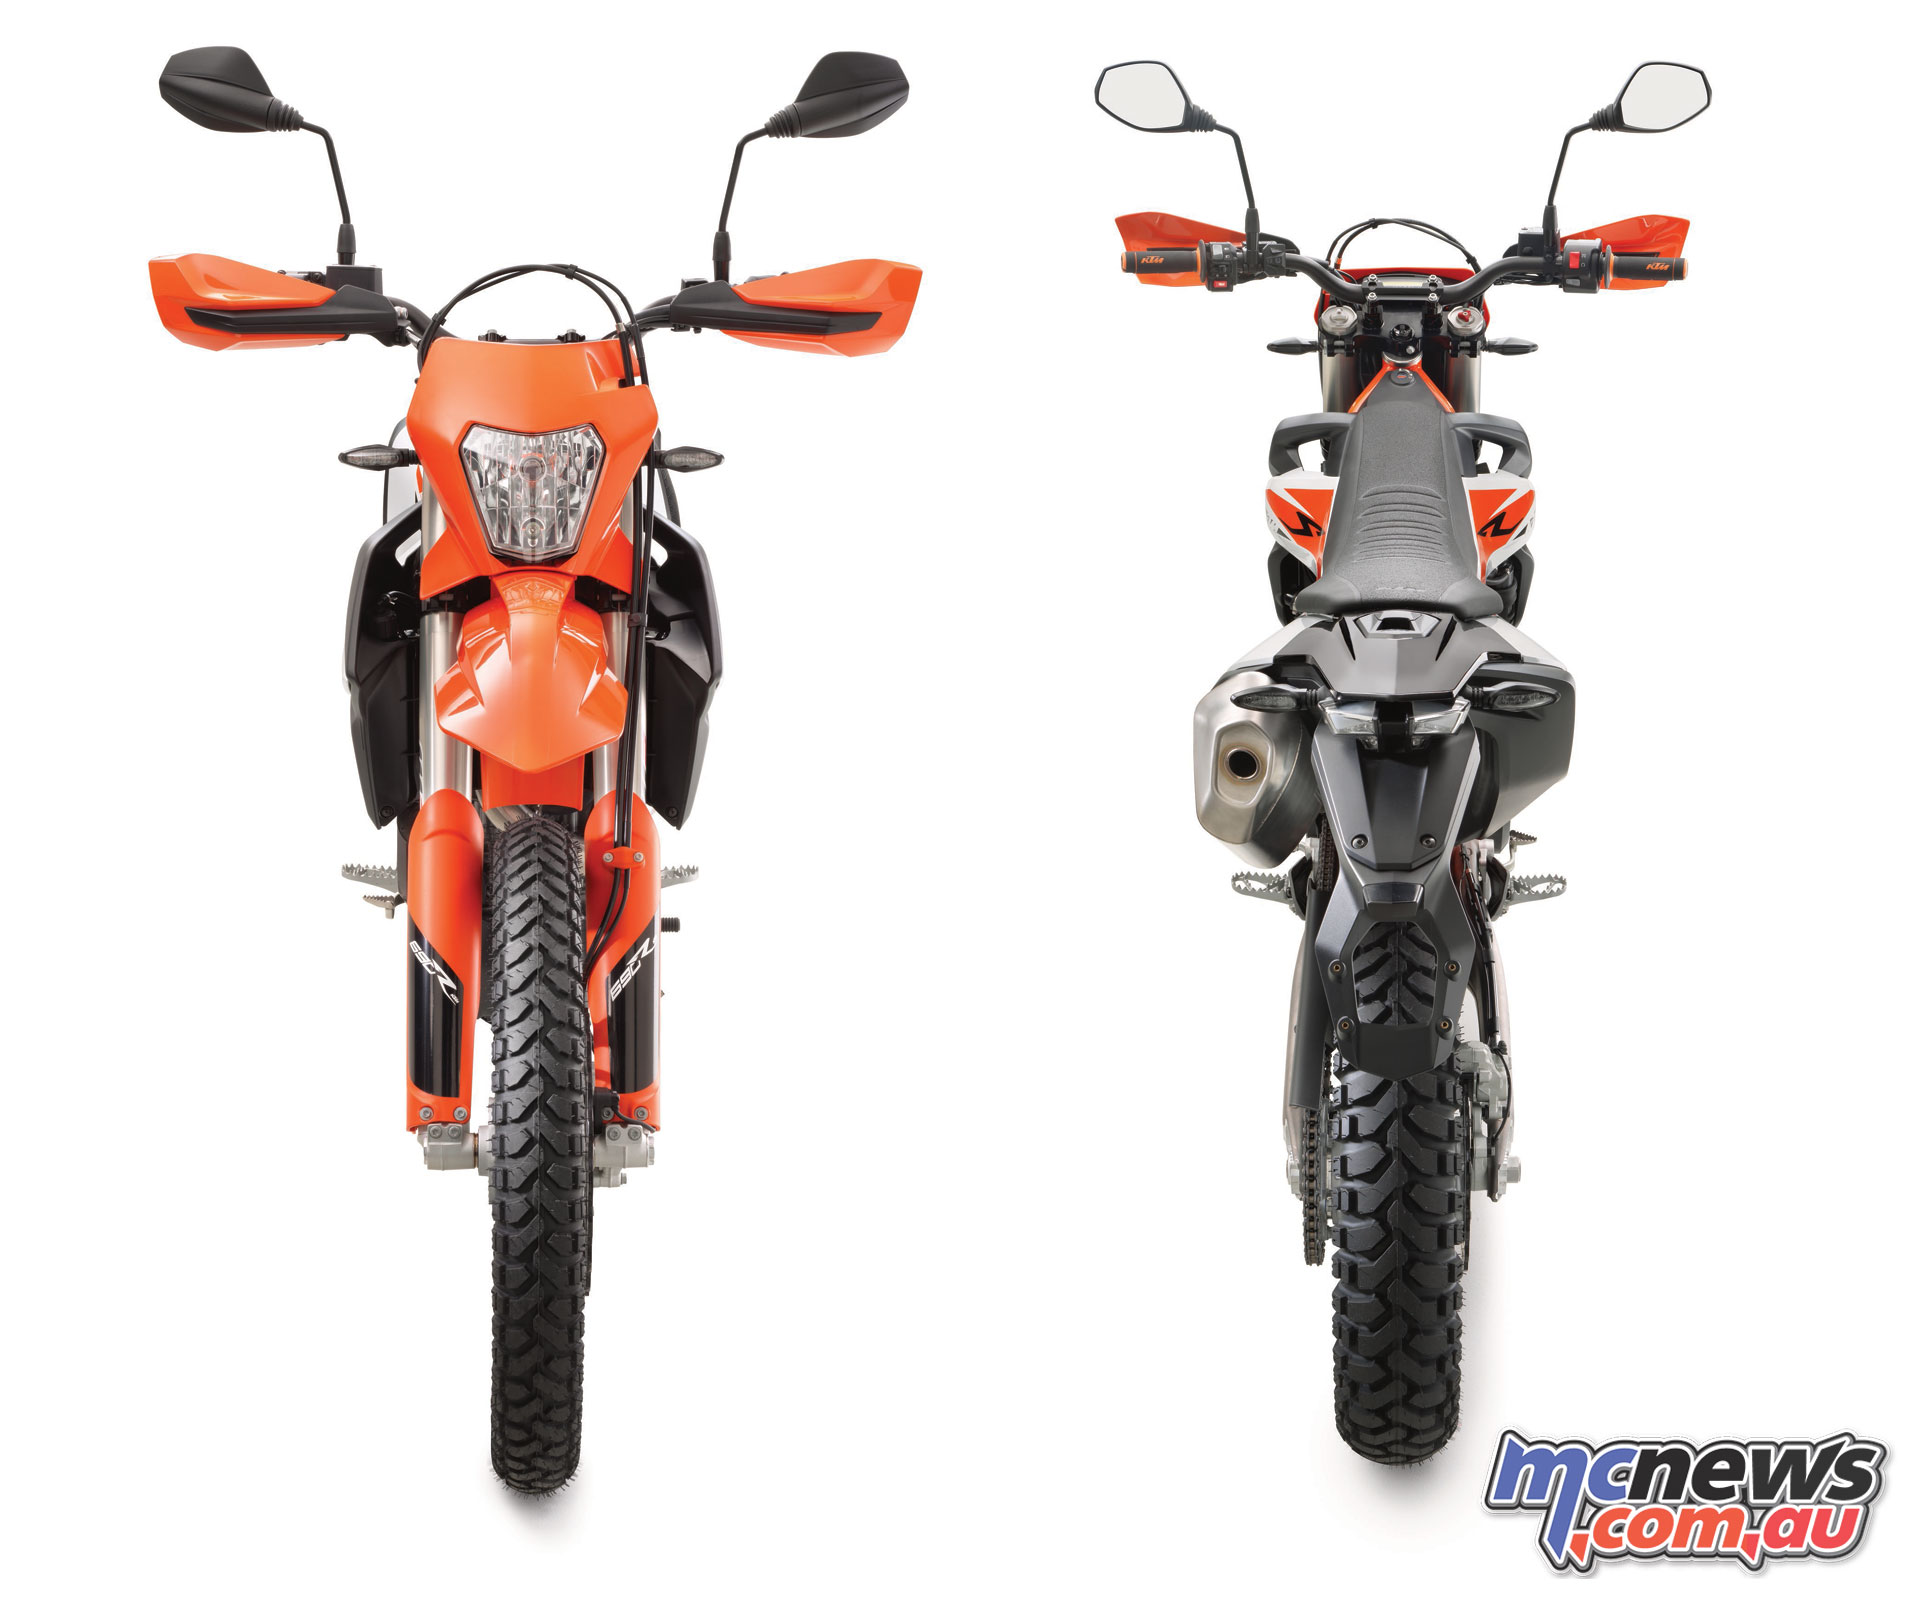 19 Ktm 690 Enduro R Reviewed Motorcycle News Sport And Reviews